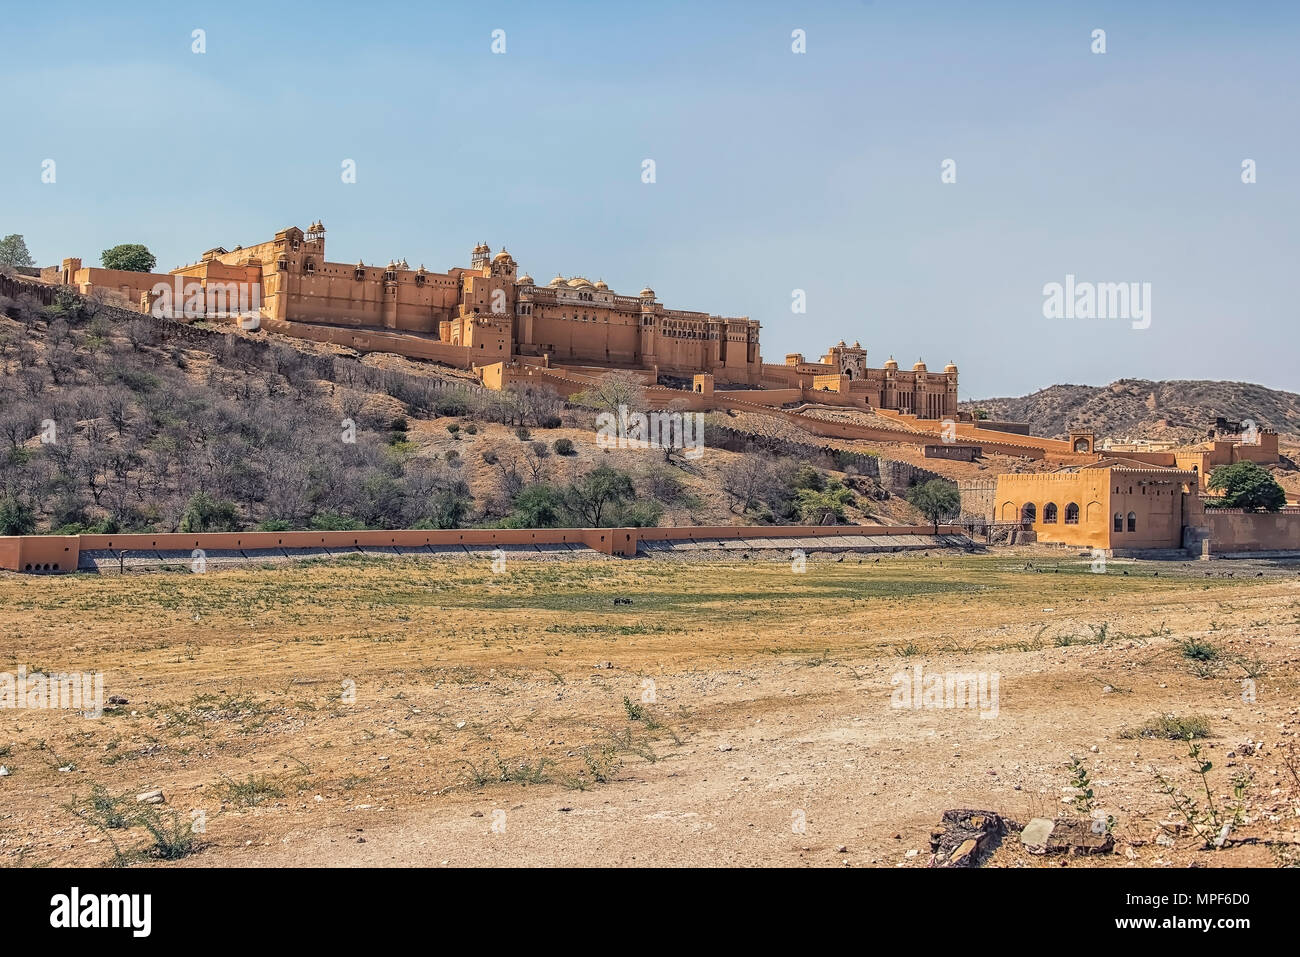 Amber fort in Jaipur, India Stock Photo